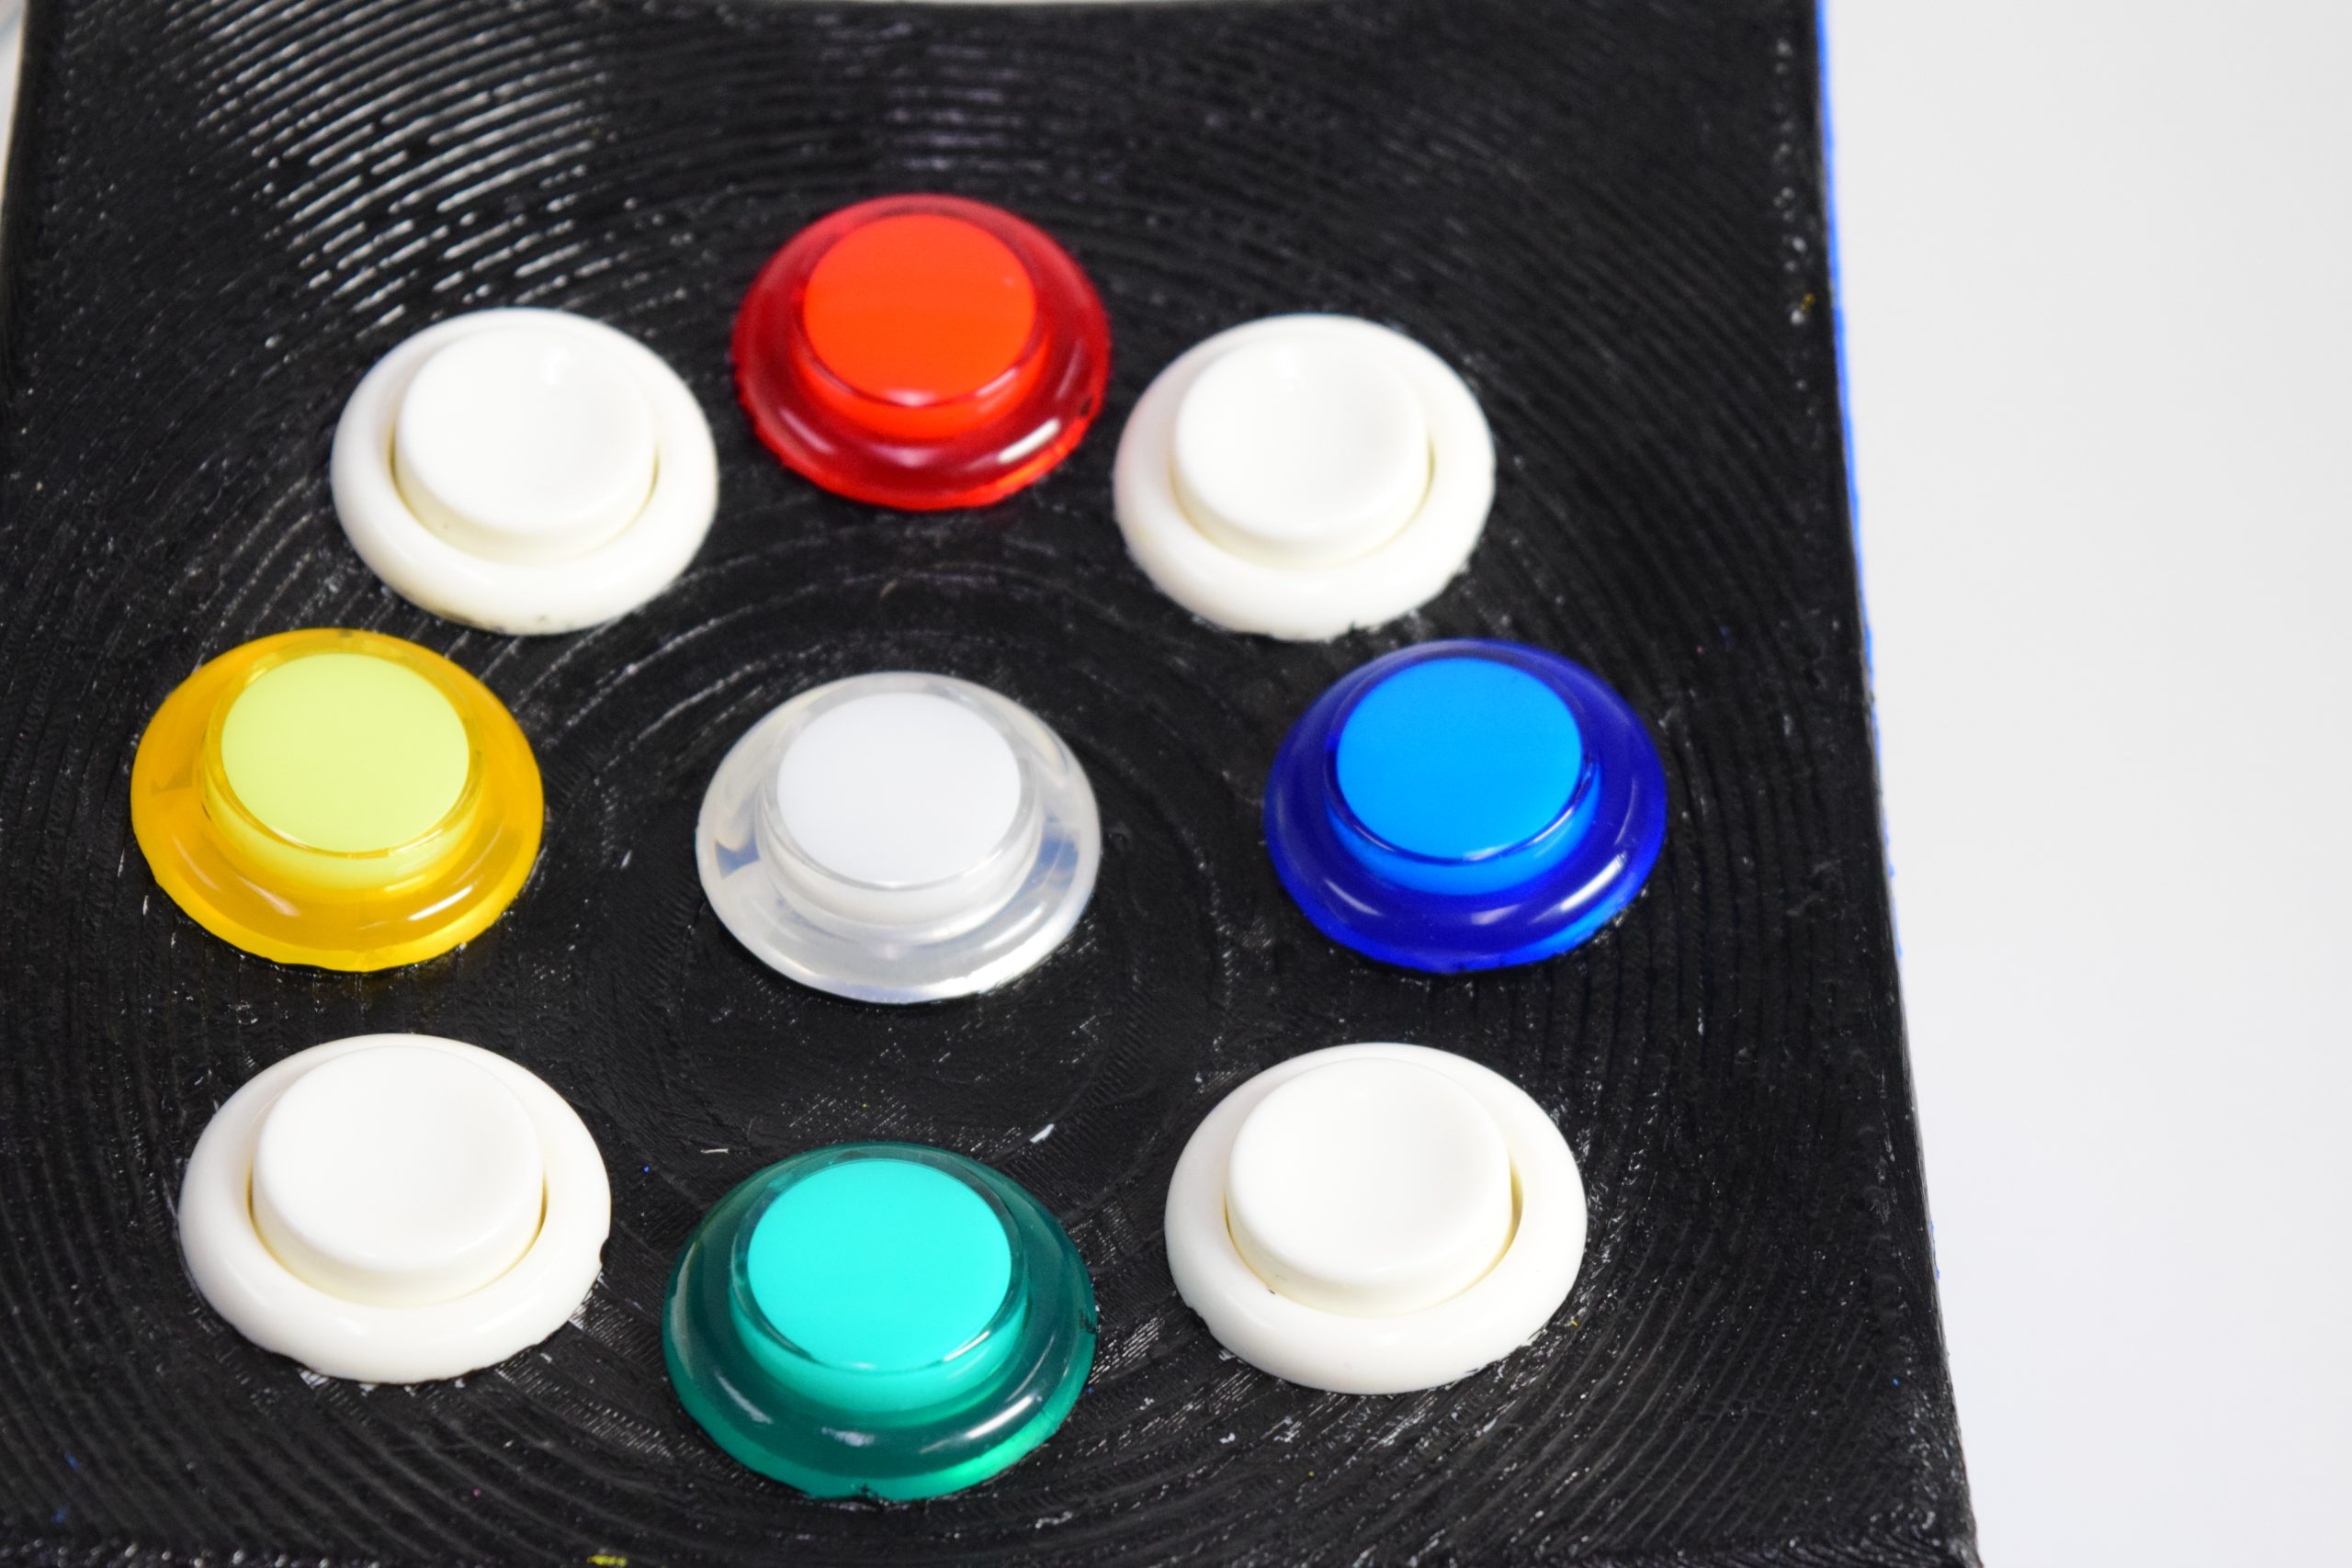 A curved black surface with 9 arcade buttons. 8 of the arcade buttons are arranged in a circle and the 9th button lies in the center.